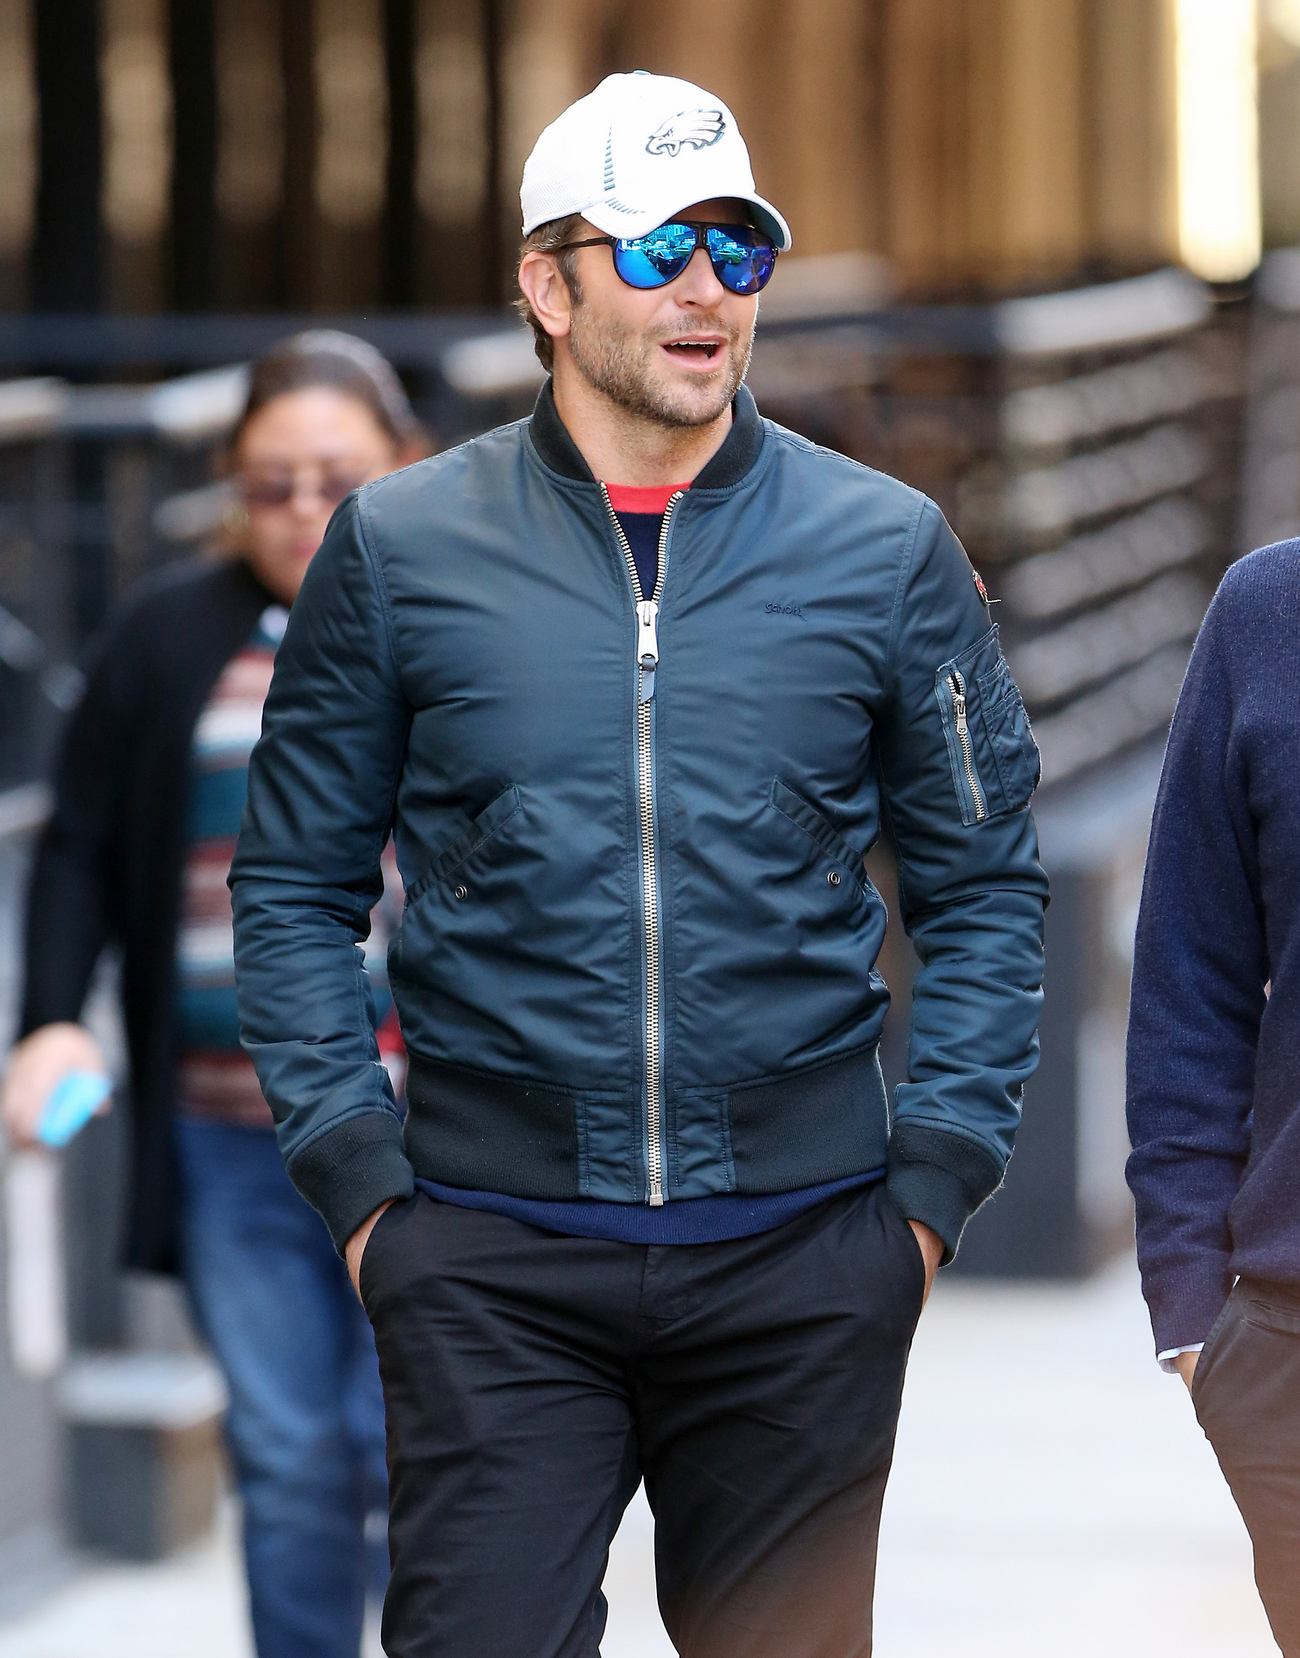 Bradley Cooper Looks Cool With Blue Coat and Shades in NYC – Celeb Donut